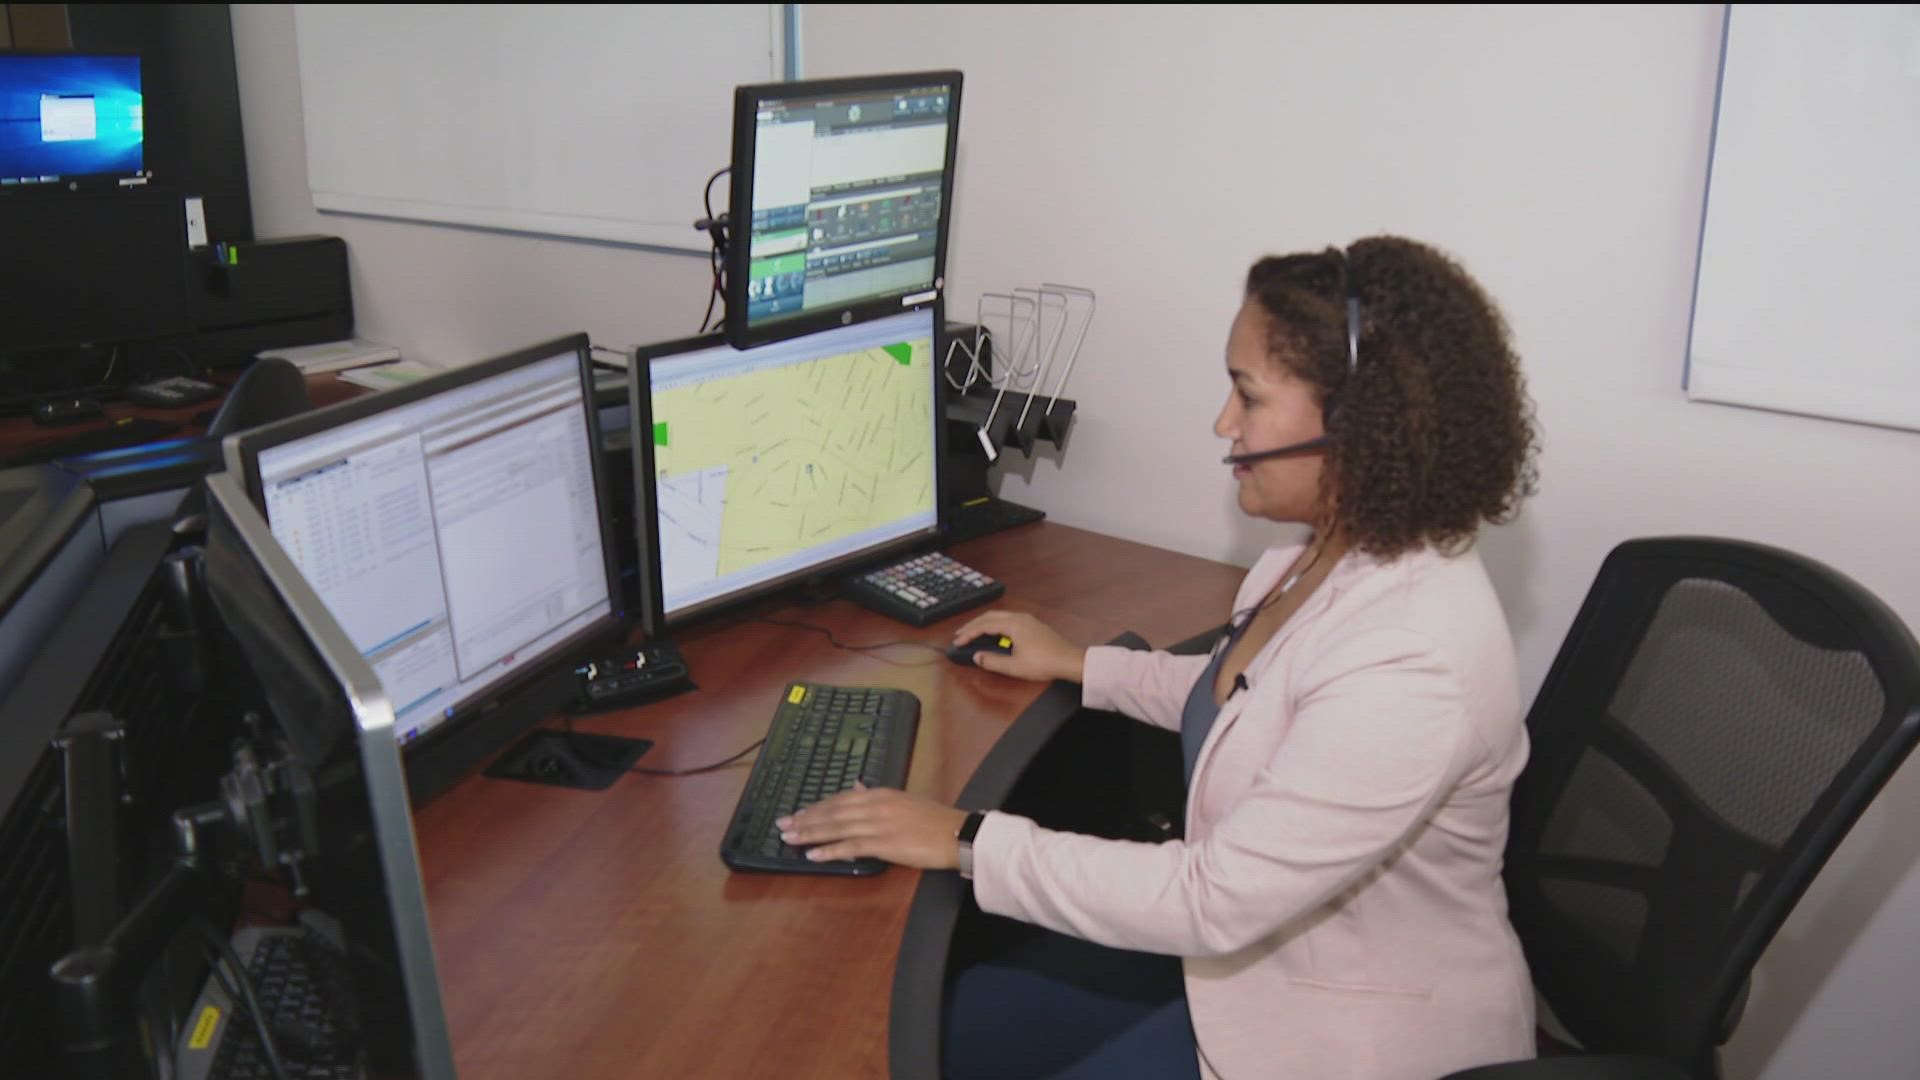 Emergency service dispatchers are a lifeline between someone in danger and the help they need.